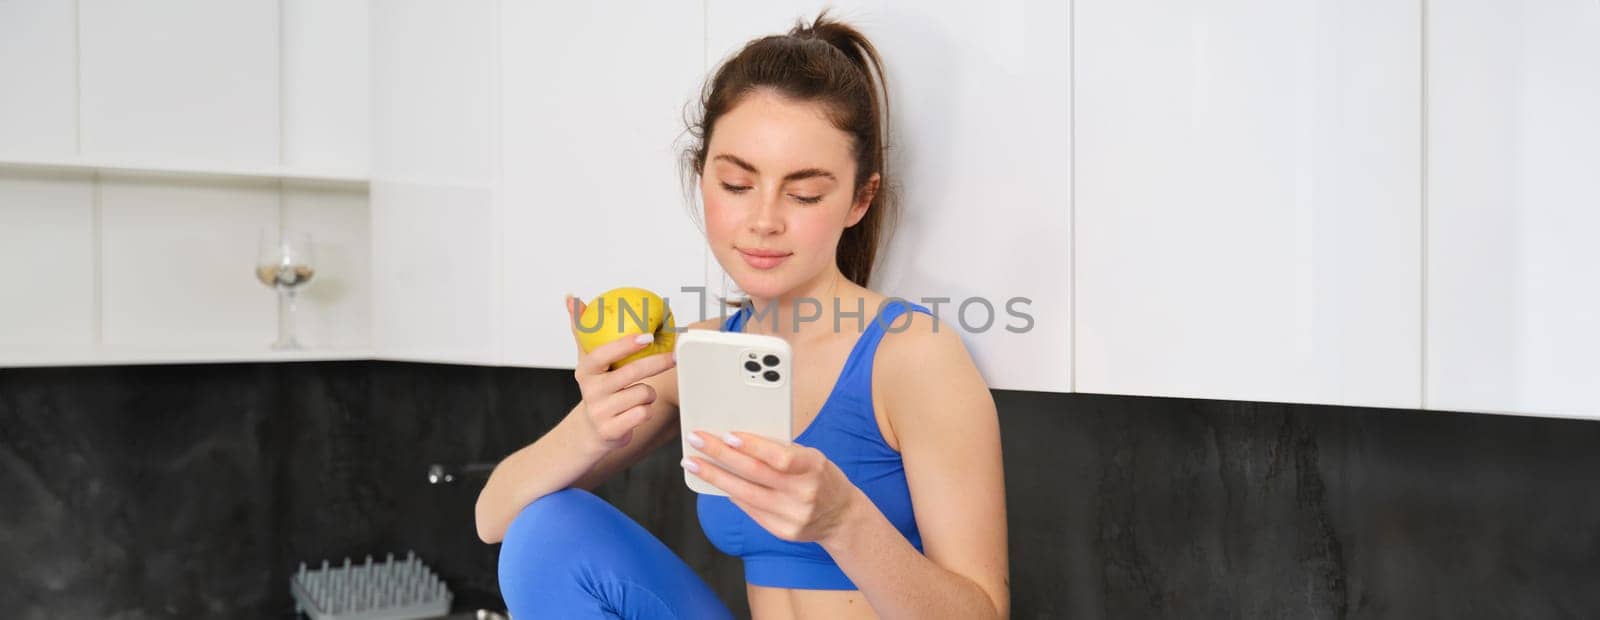 Portrait of fitness woman, sitting in kitchen with smartphone, scrolling social media and eating an apple, having a healthy snack between workout, wearing sports activewear.